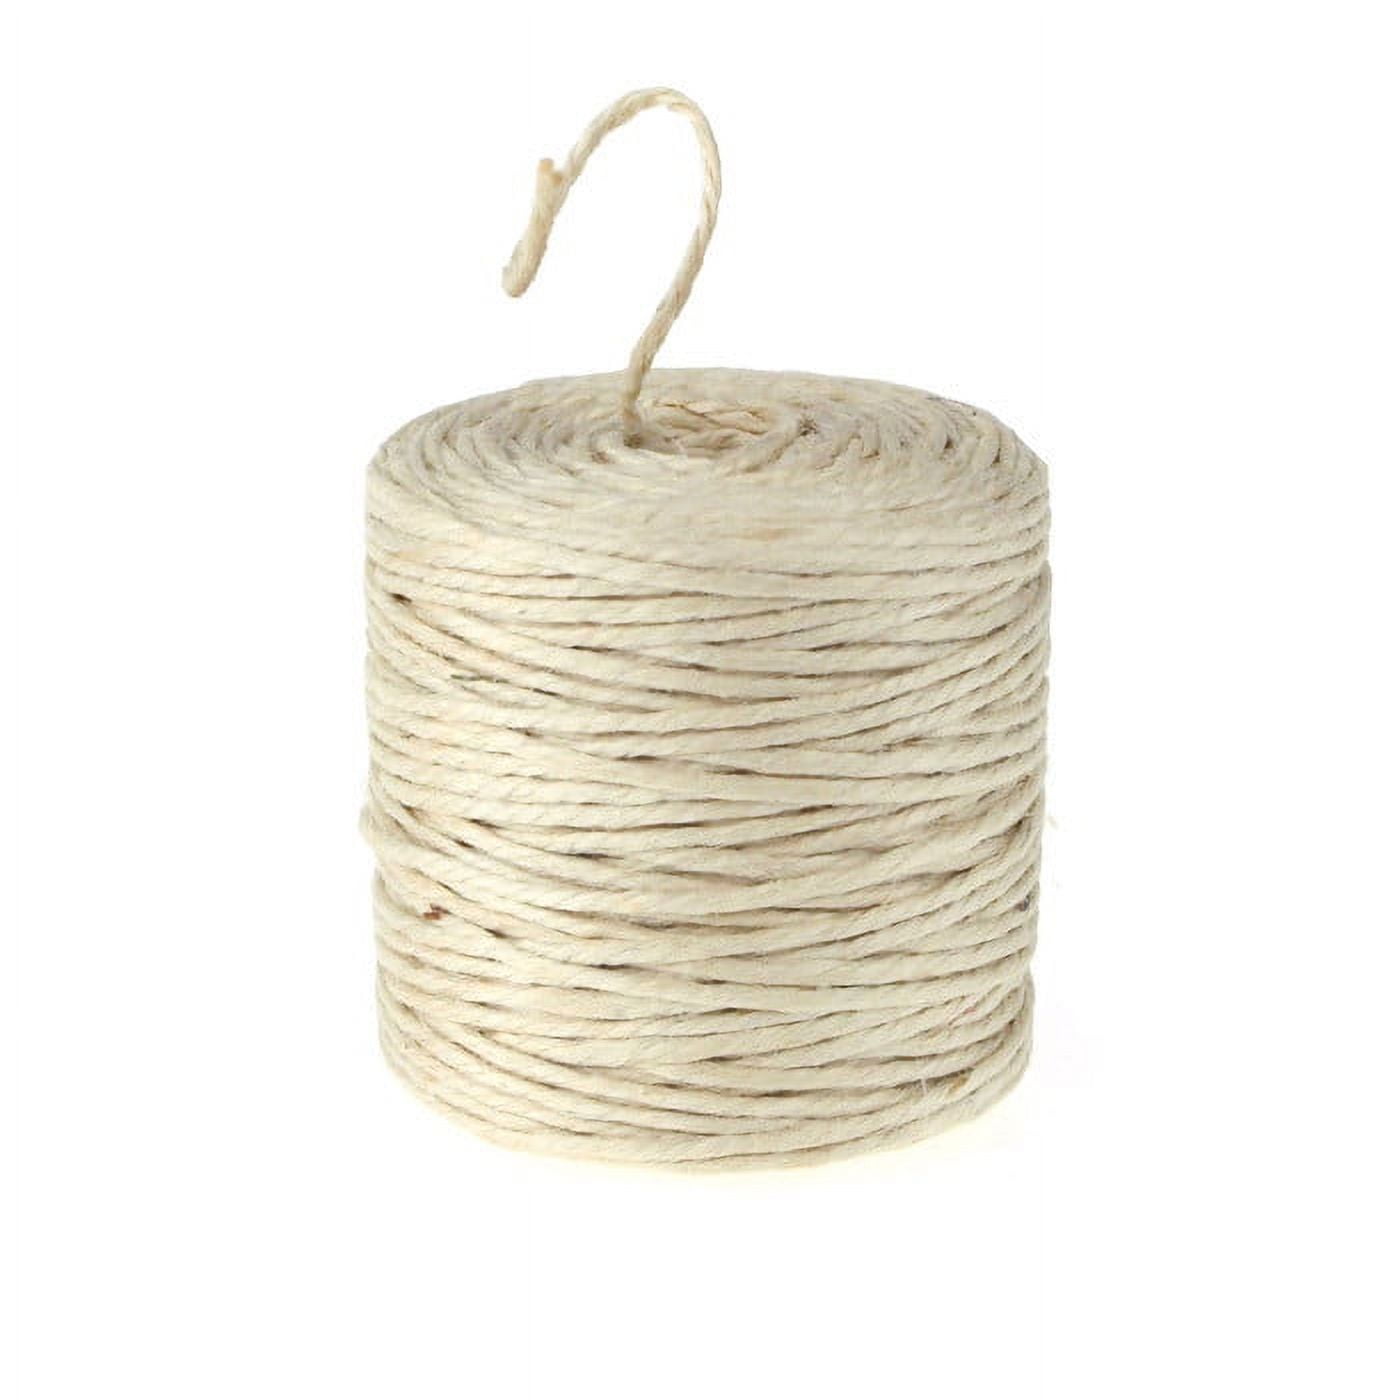 1Roll 60M burlap Rope Natural Jute Twine Burlap String Hemp Rope Wedding  Gift Wrapping Cords Thread 6 Colors